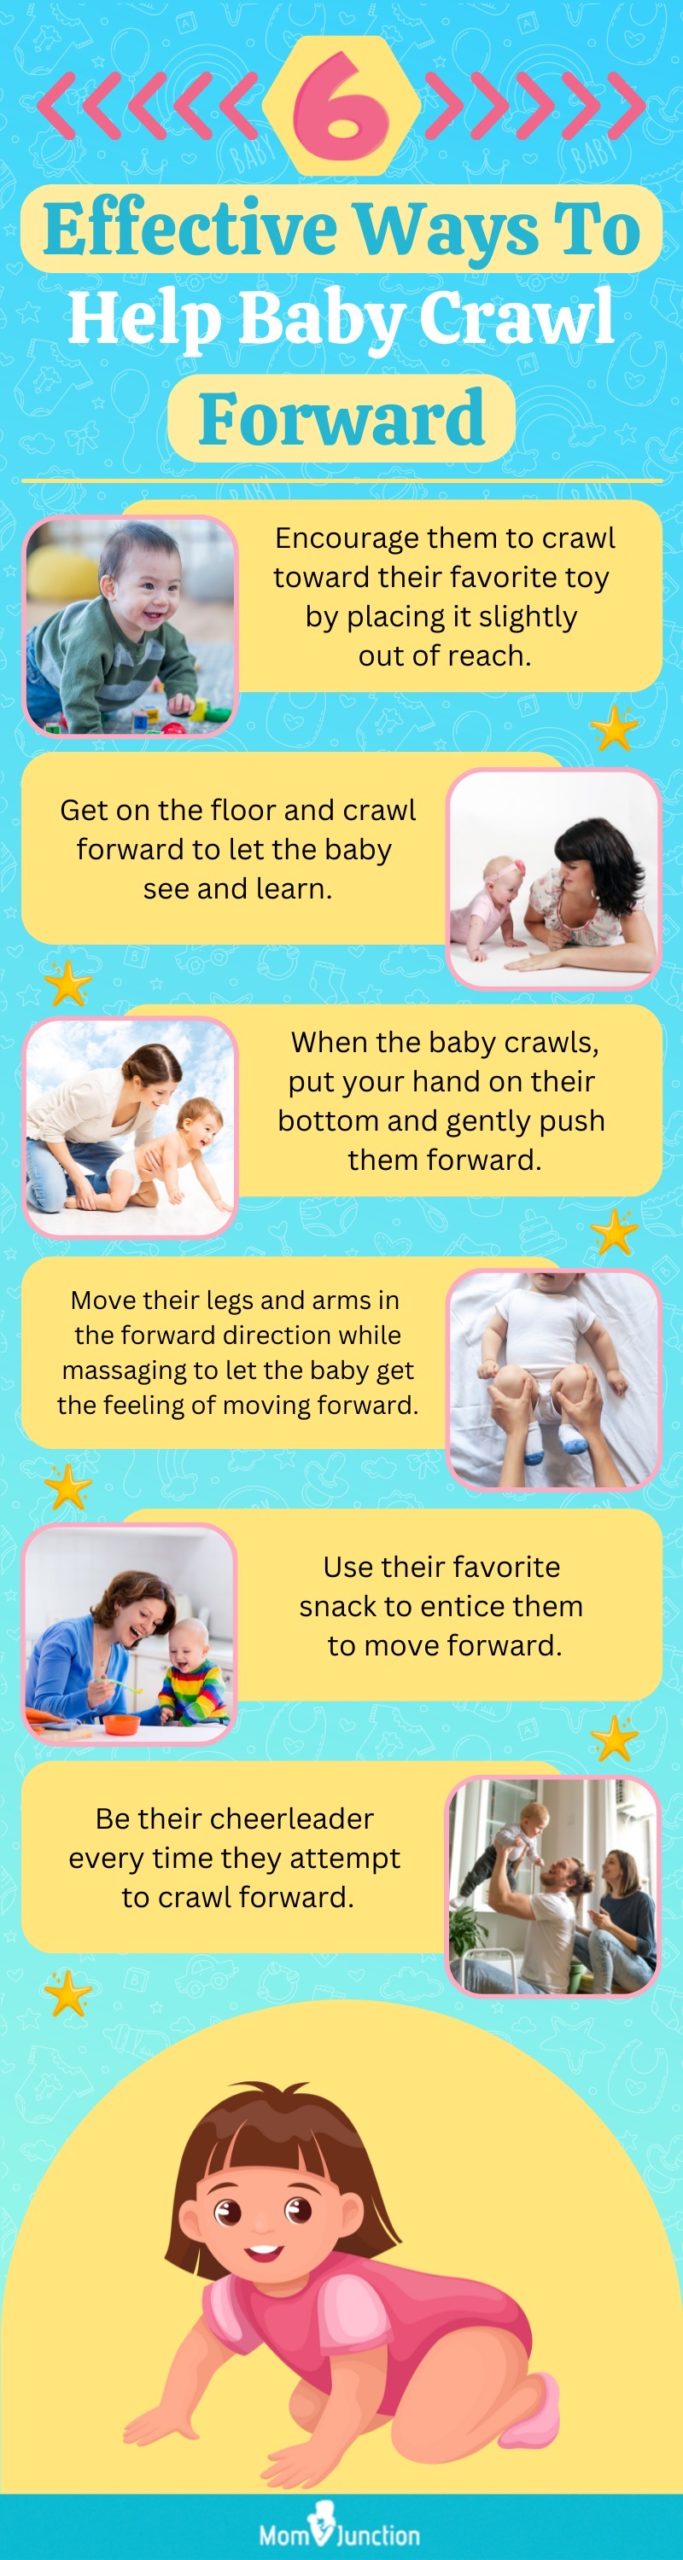 how to help the baby crawl forward (infographic)